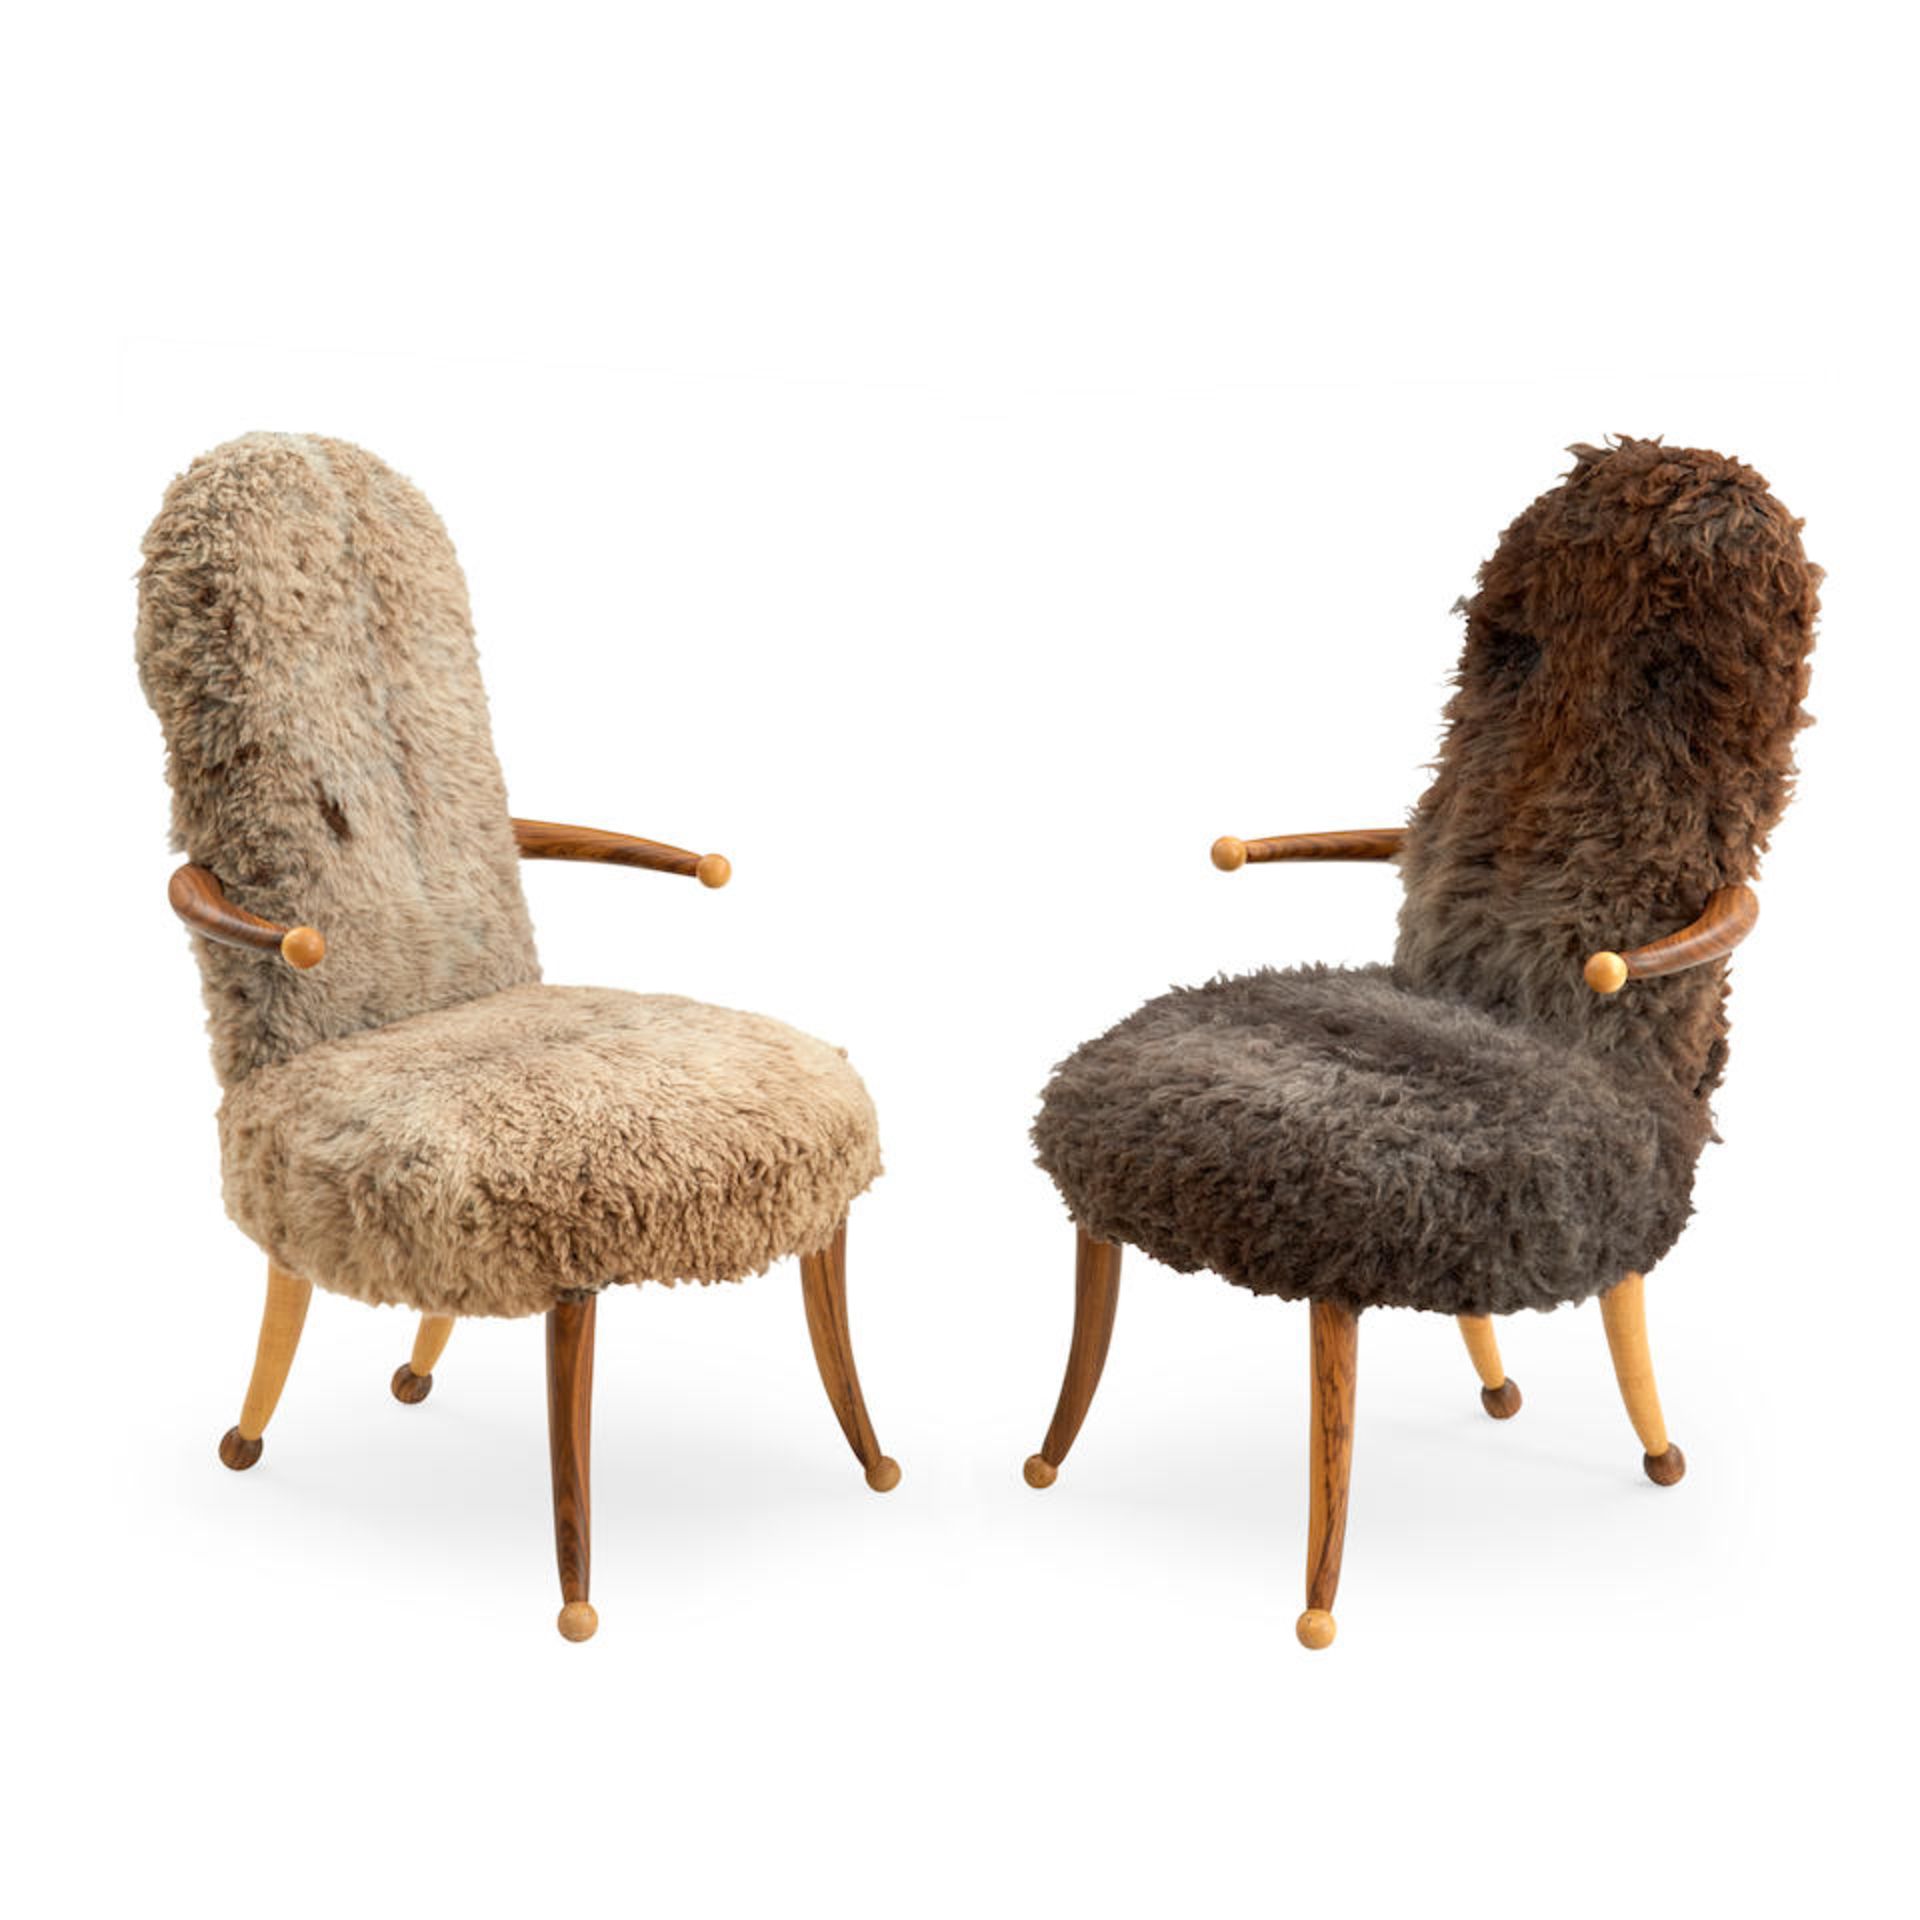 PAIR OF TOMMY SIMPSON (B.1939) ARMCHAIRS, United States, c. 2000, mixed hardwoods, sheep skin, u... - Image 3 of 3